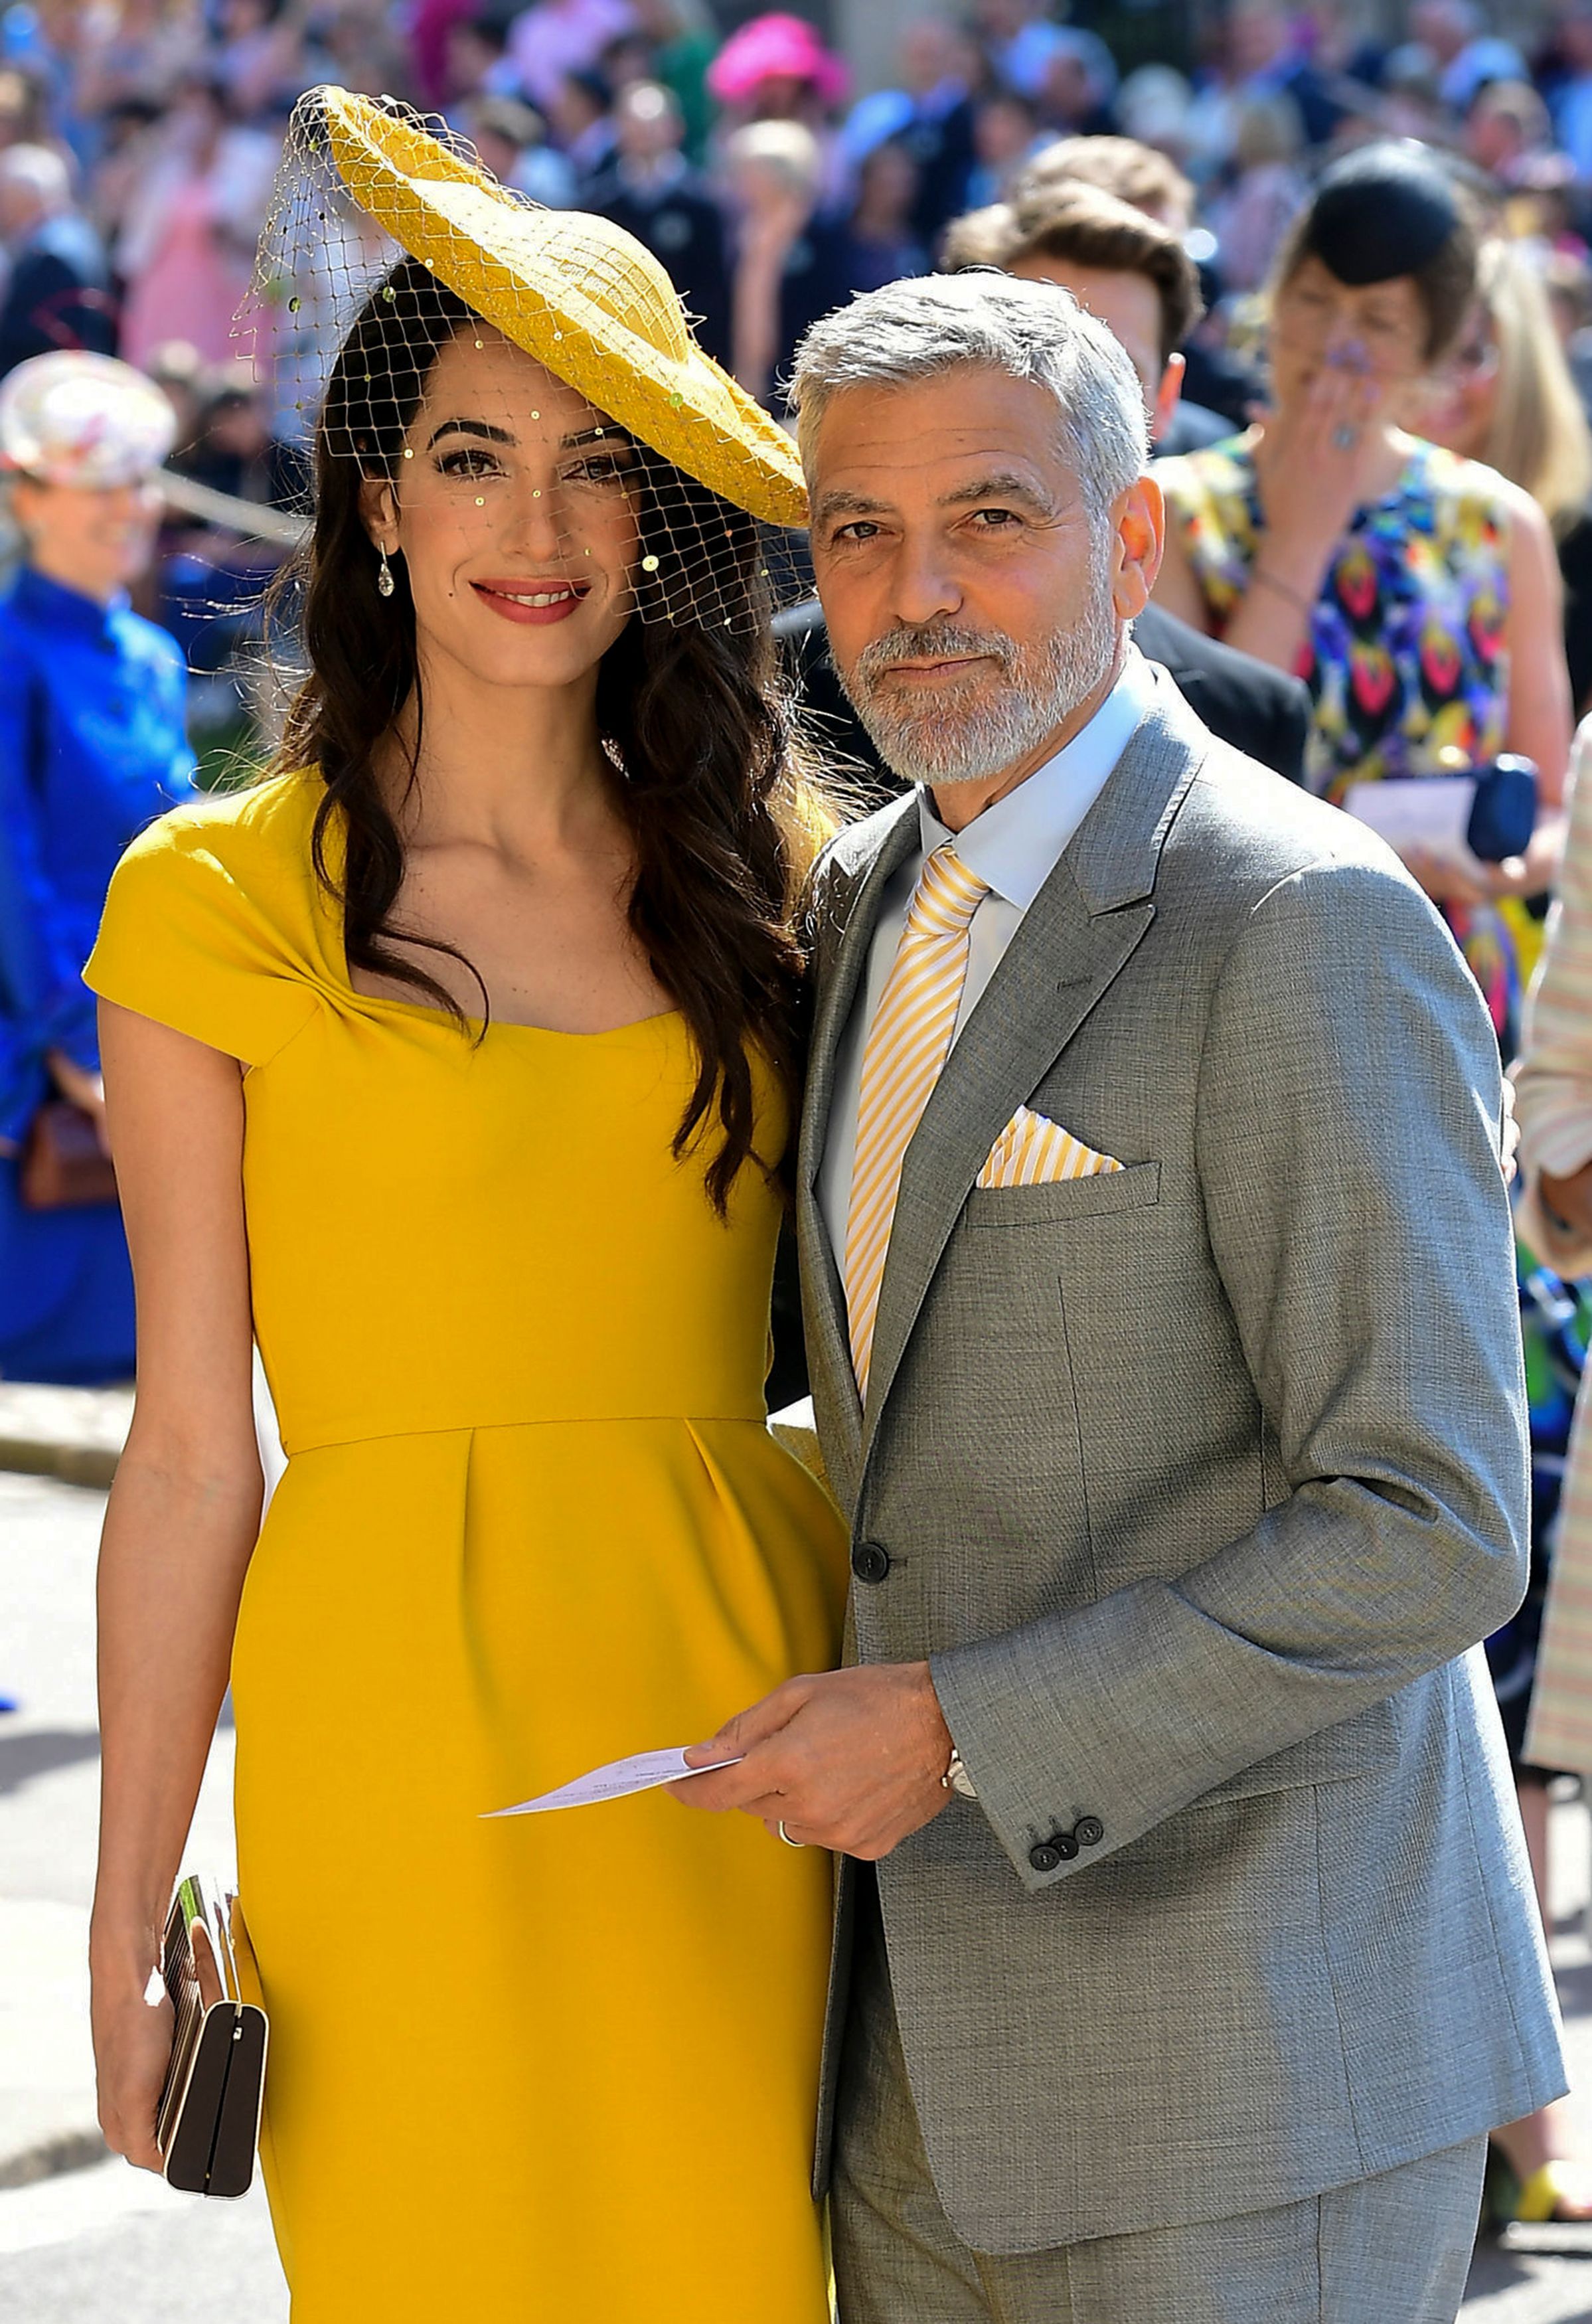 George Clooney and Amal Clooney arrive for the wedding ceremony of Britain's Prince Harry, Duke of Sussex and US actress Meghan Markle at St George's Chapel, Windsor Castle, in Windsor, on May 19, 2018. | Source: Getty Images